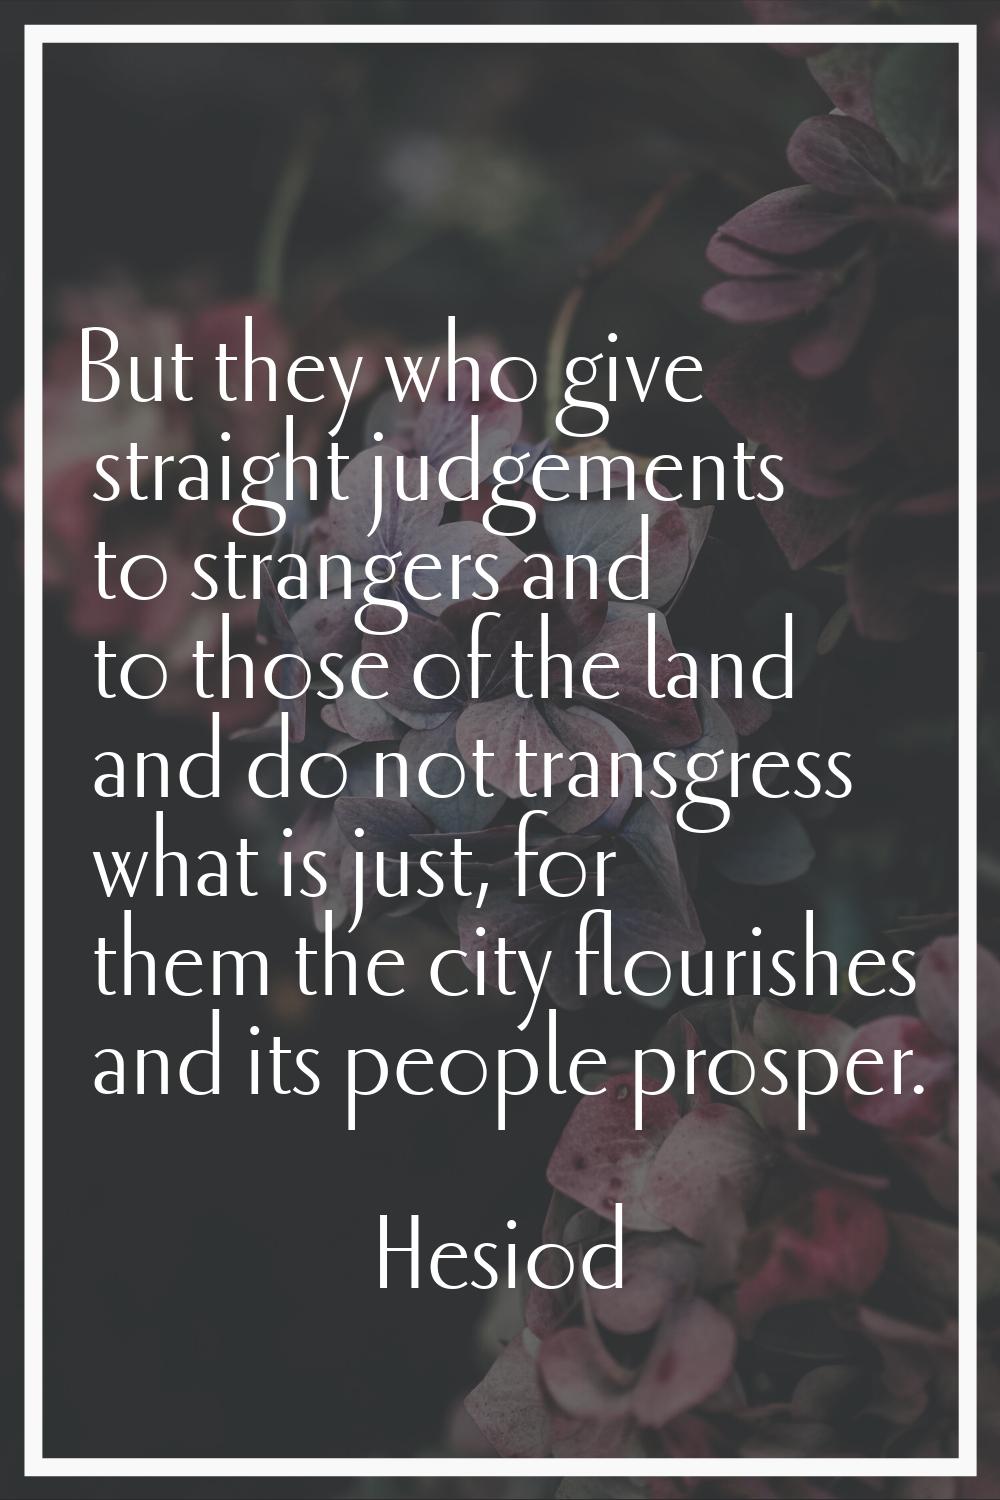 But they who give straight judgements to strangers and to those of the land and do not transgress w